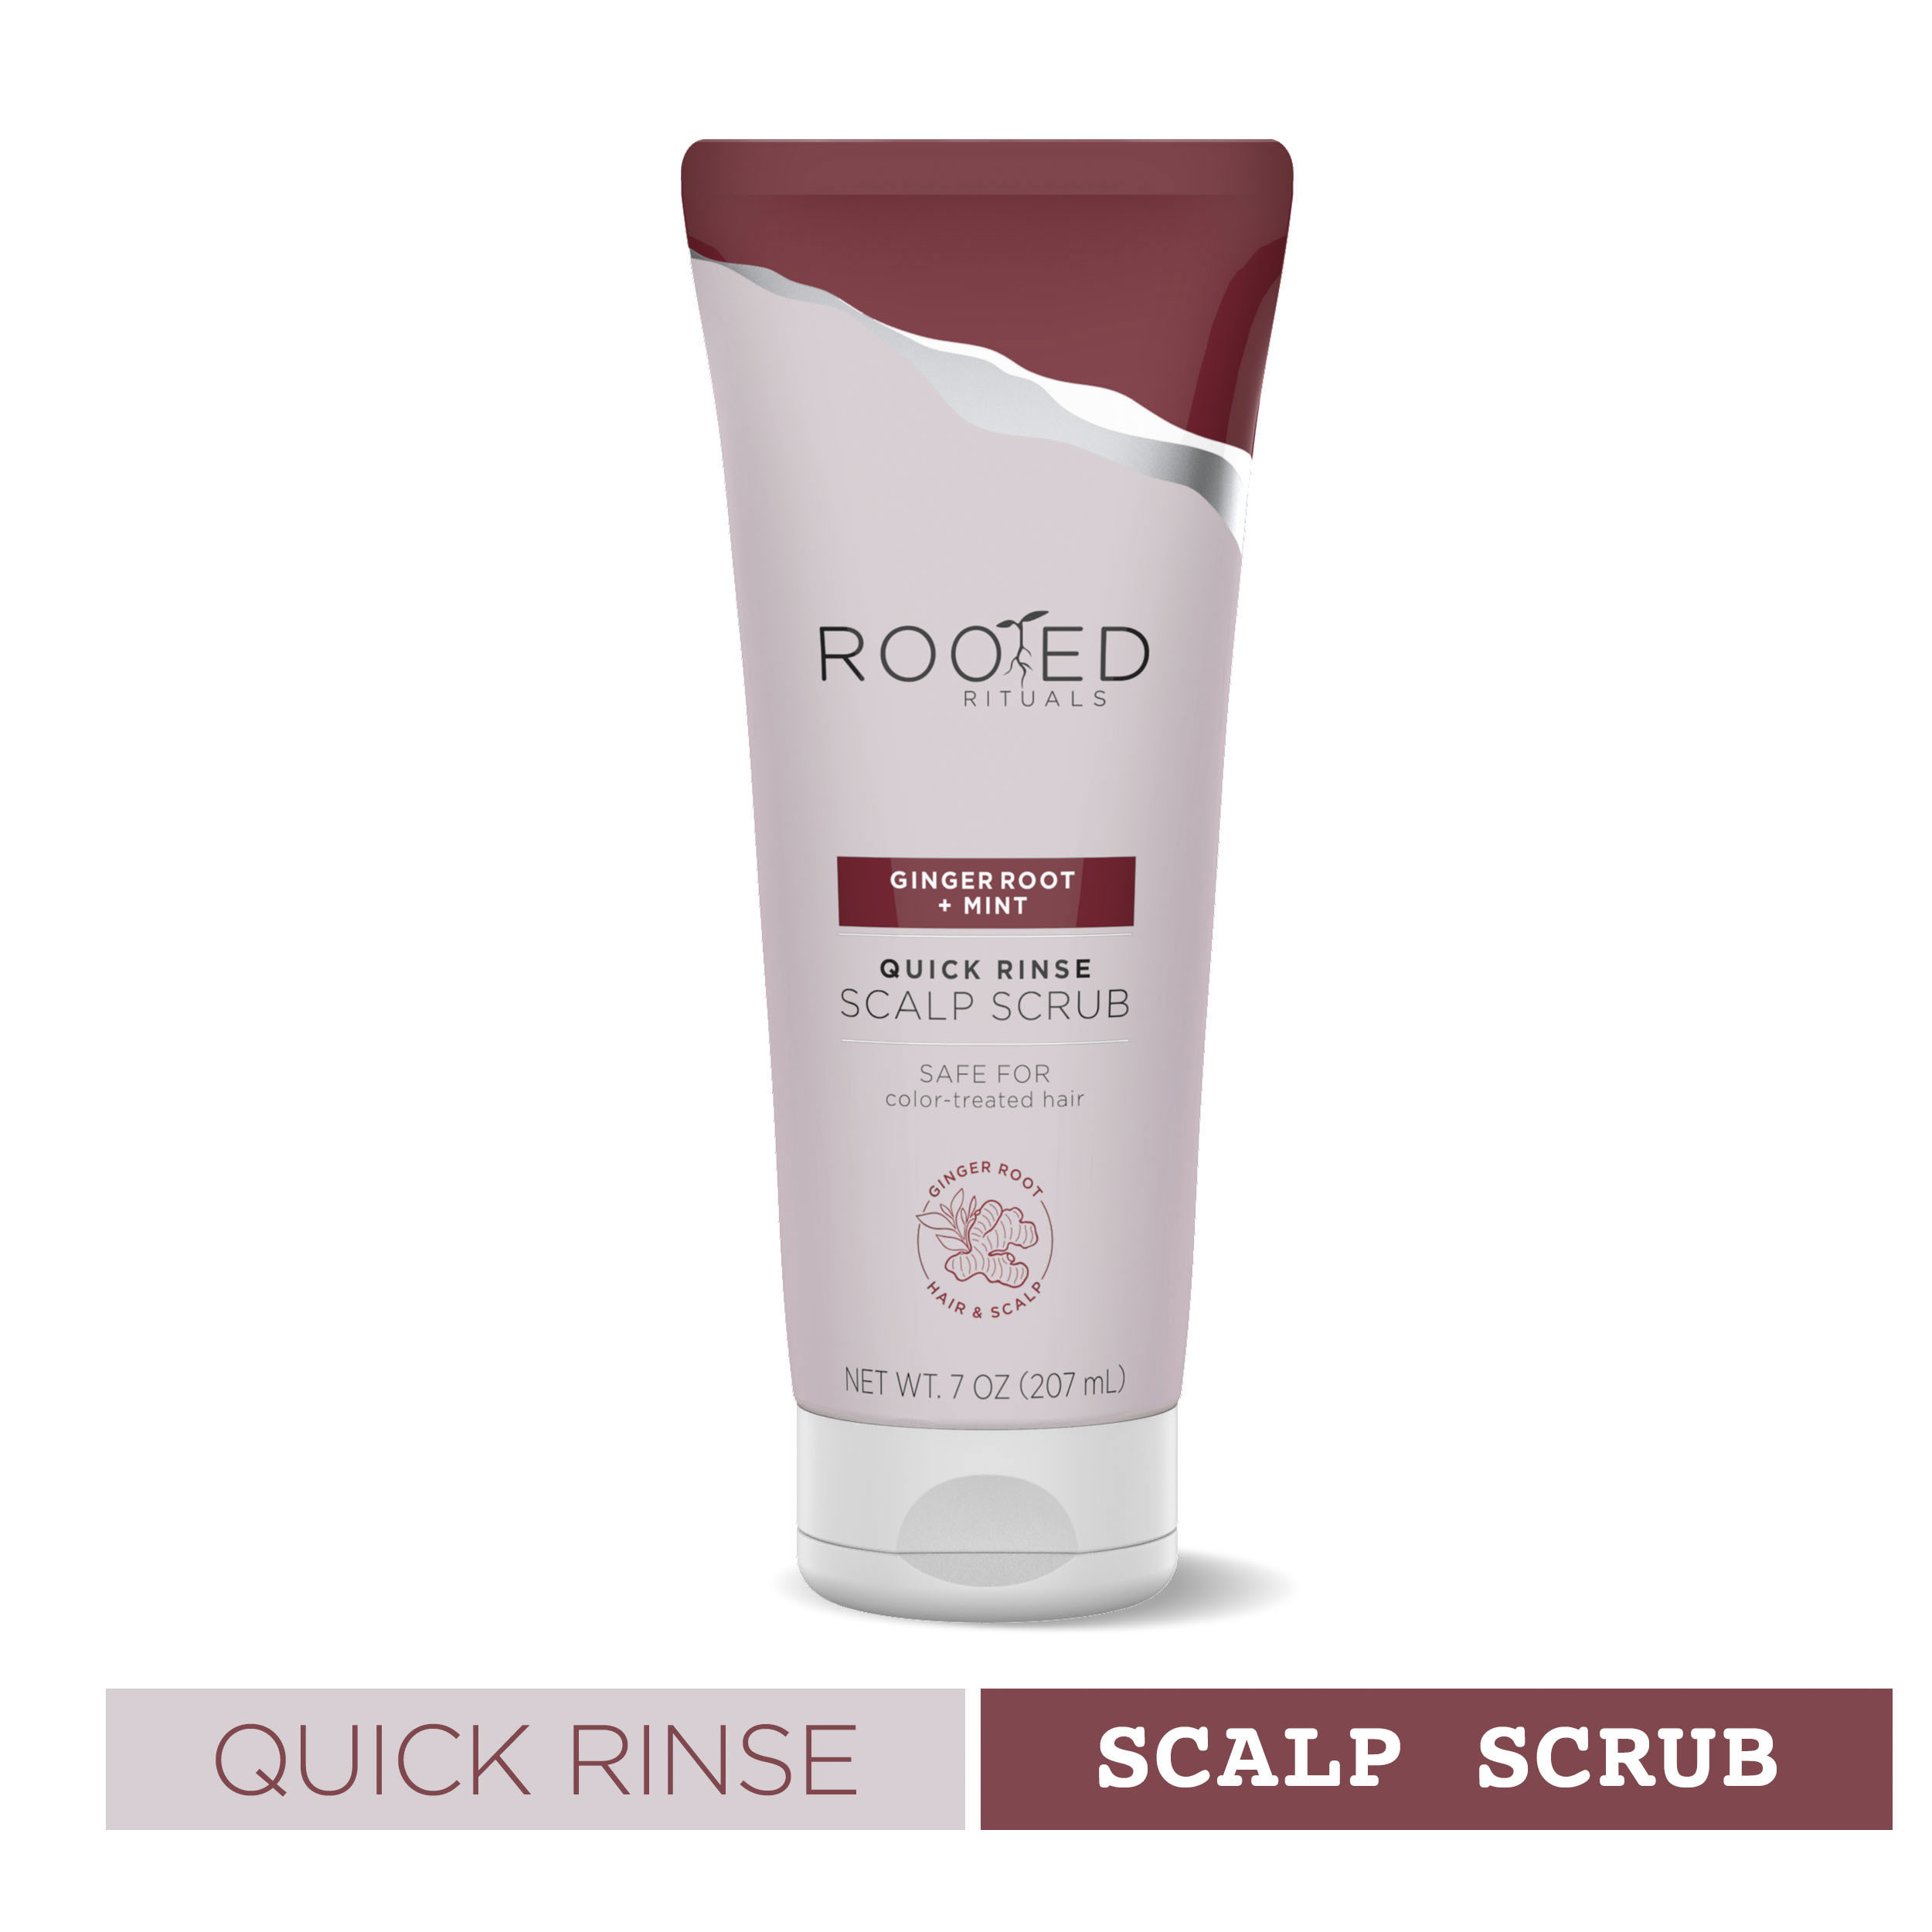 Rooted Rituals Ginger Root and Mint Quick-Rinse Scalp Scrub, 6.7 fl oz - image 1 of 9